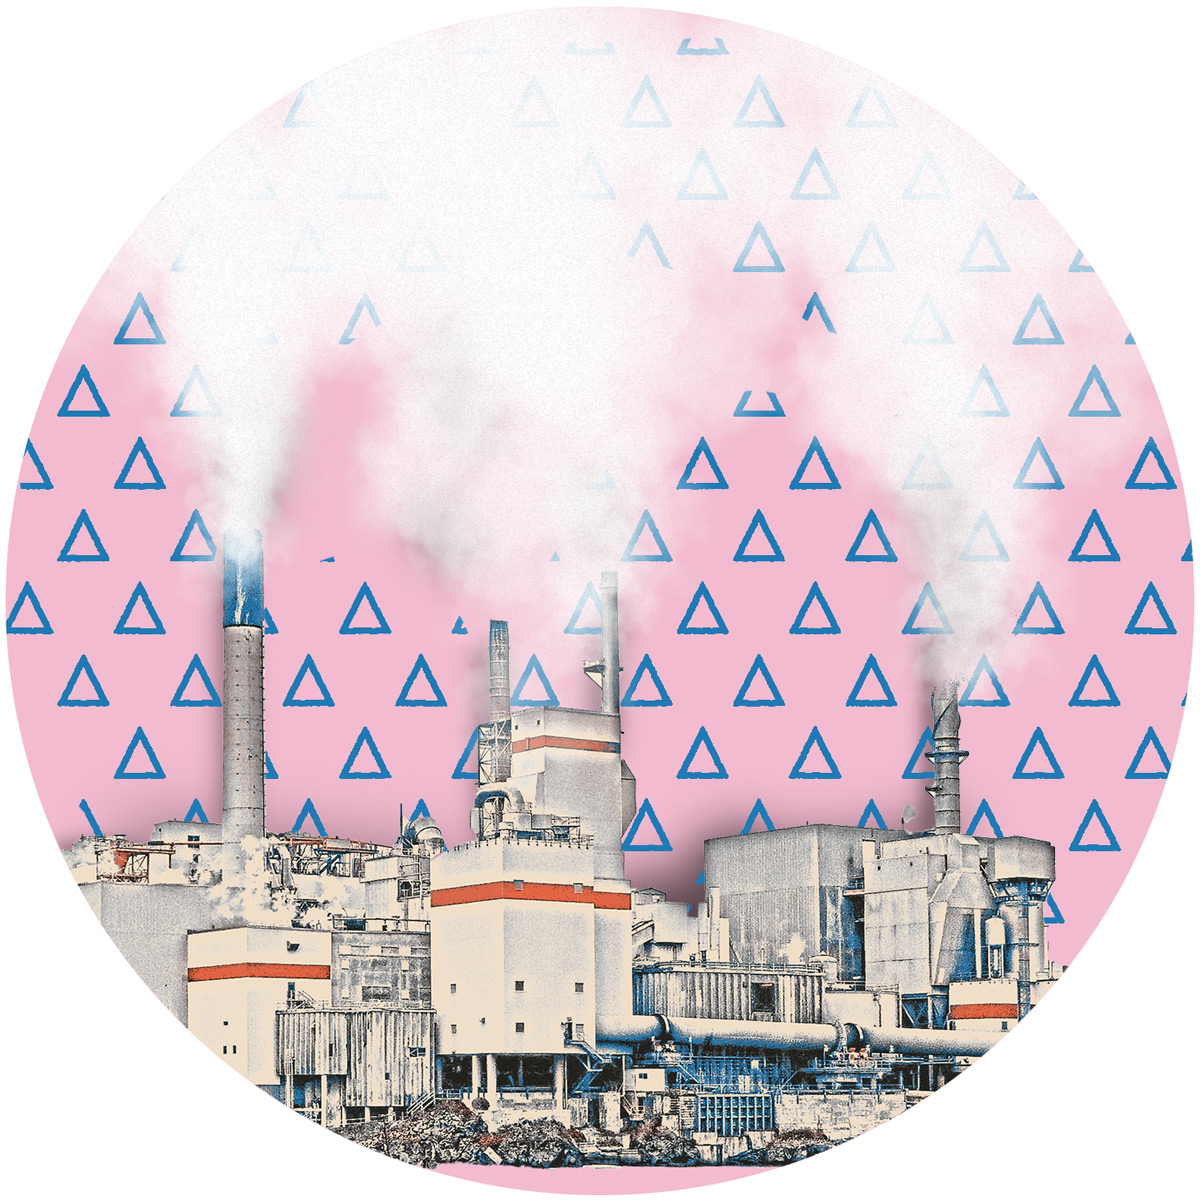 A graphic illustration of factory towers with smoke on a pink background